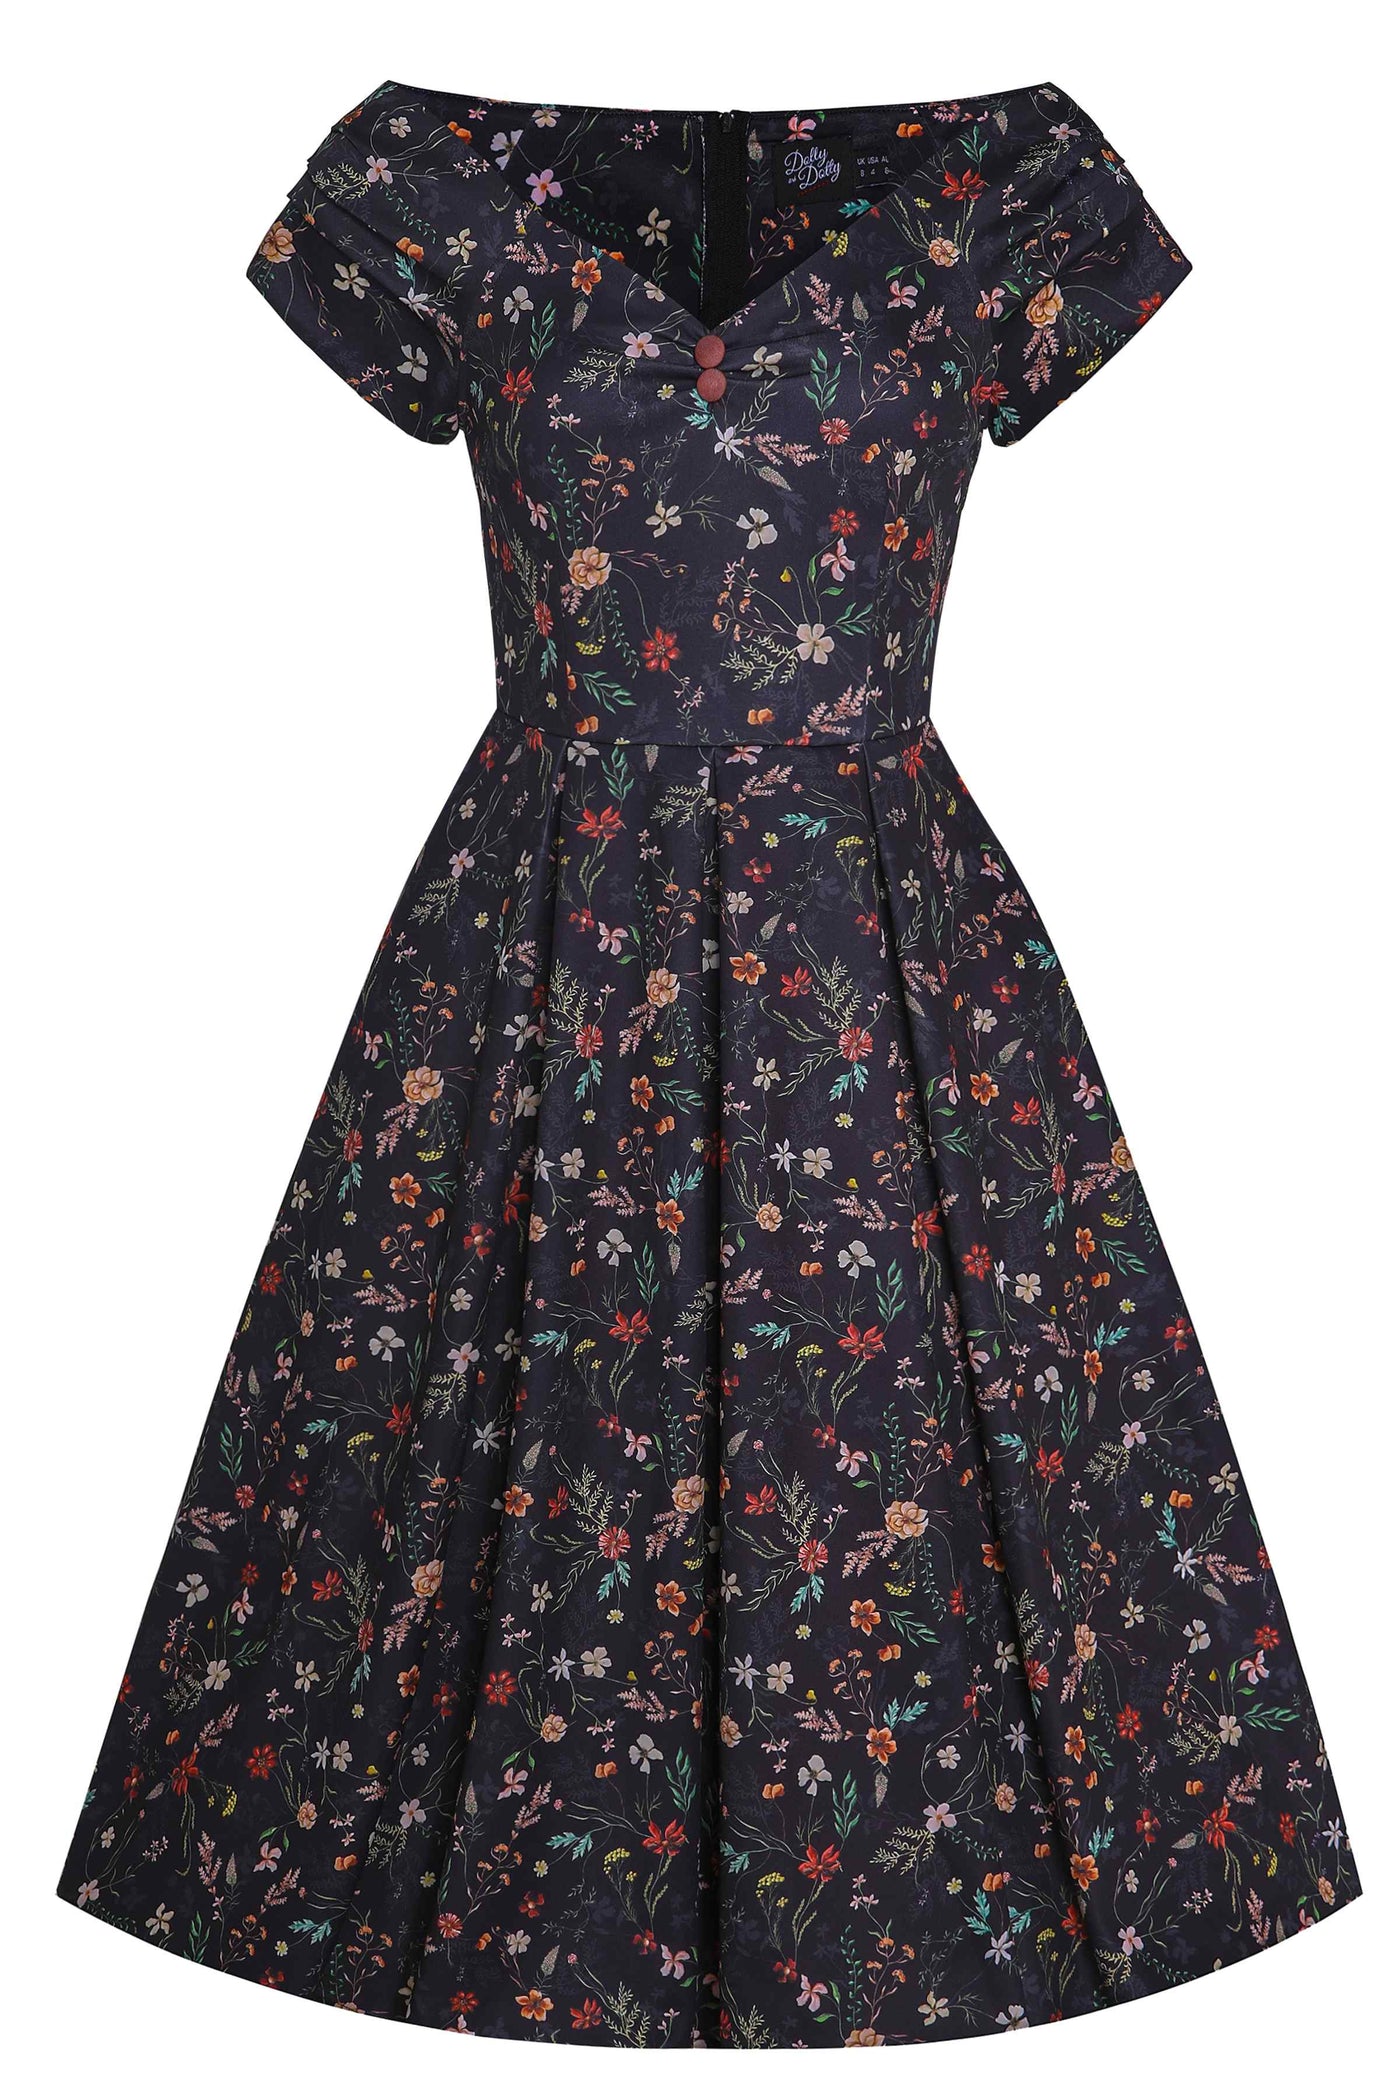 Front View of Meadow Floral Black Off Shoulder Dress